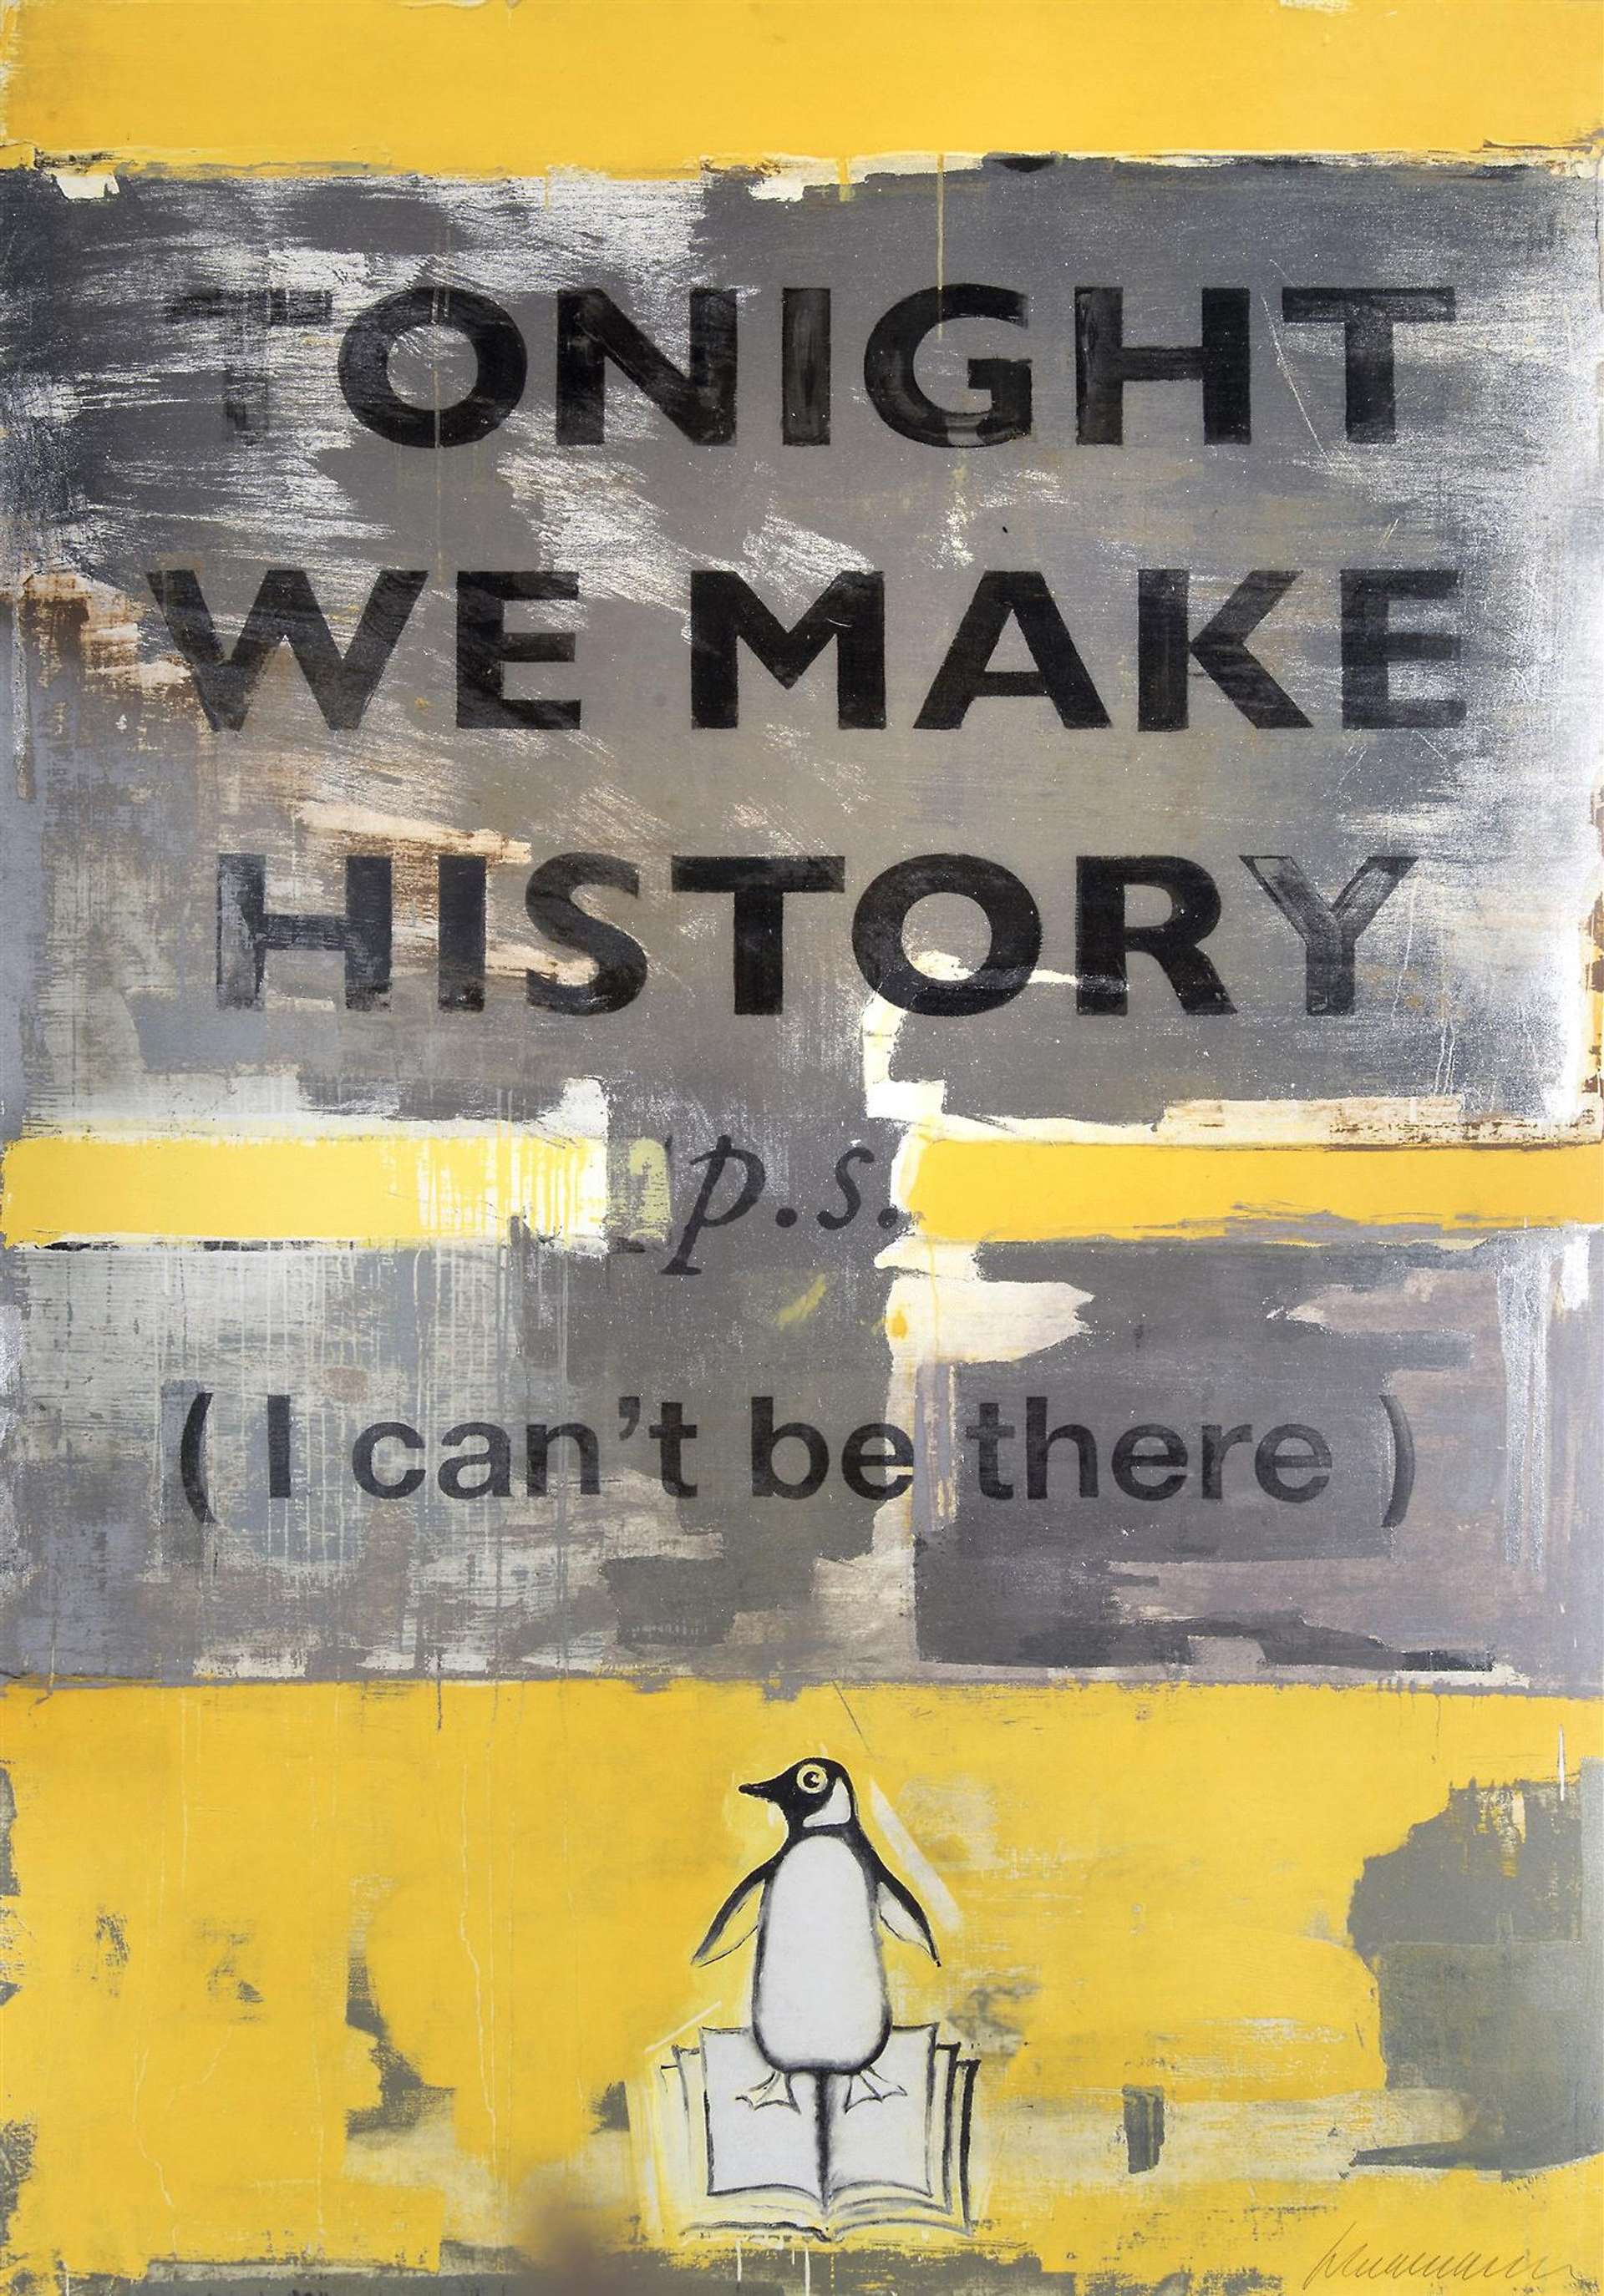 The screen print depicts a vintage Penguin book cover. The cover is canary yellow, and the text banner has been painted with thick brushstrokes of white and grey to appear worn. Within this banner are the words: ‘TONIGHT WE MAKE HISTORY p.s (I can't be there)’.